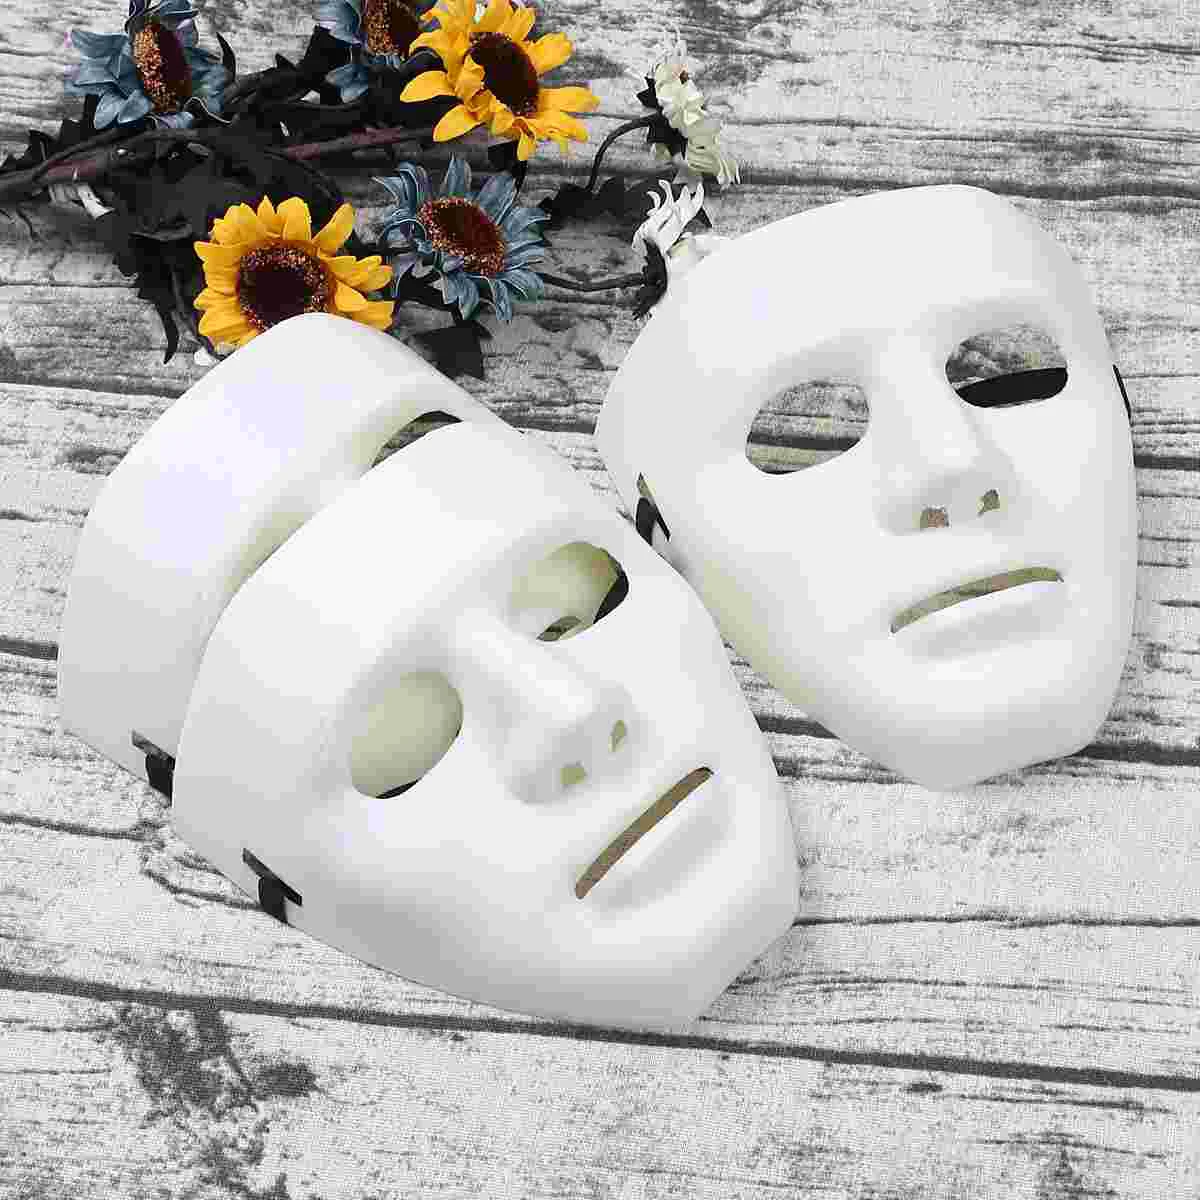 

5pcs White Street Dance Dancer Mask Plastic Cosplay Props Adult Costume Full Face Mask for Halloween Carnival Masquerade Party